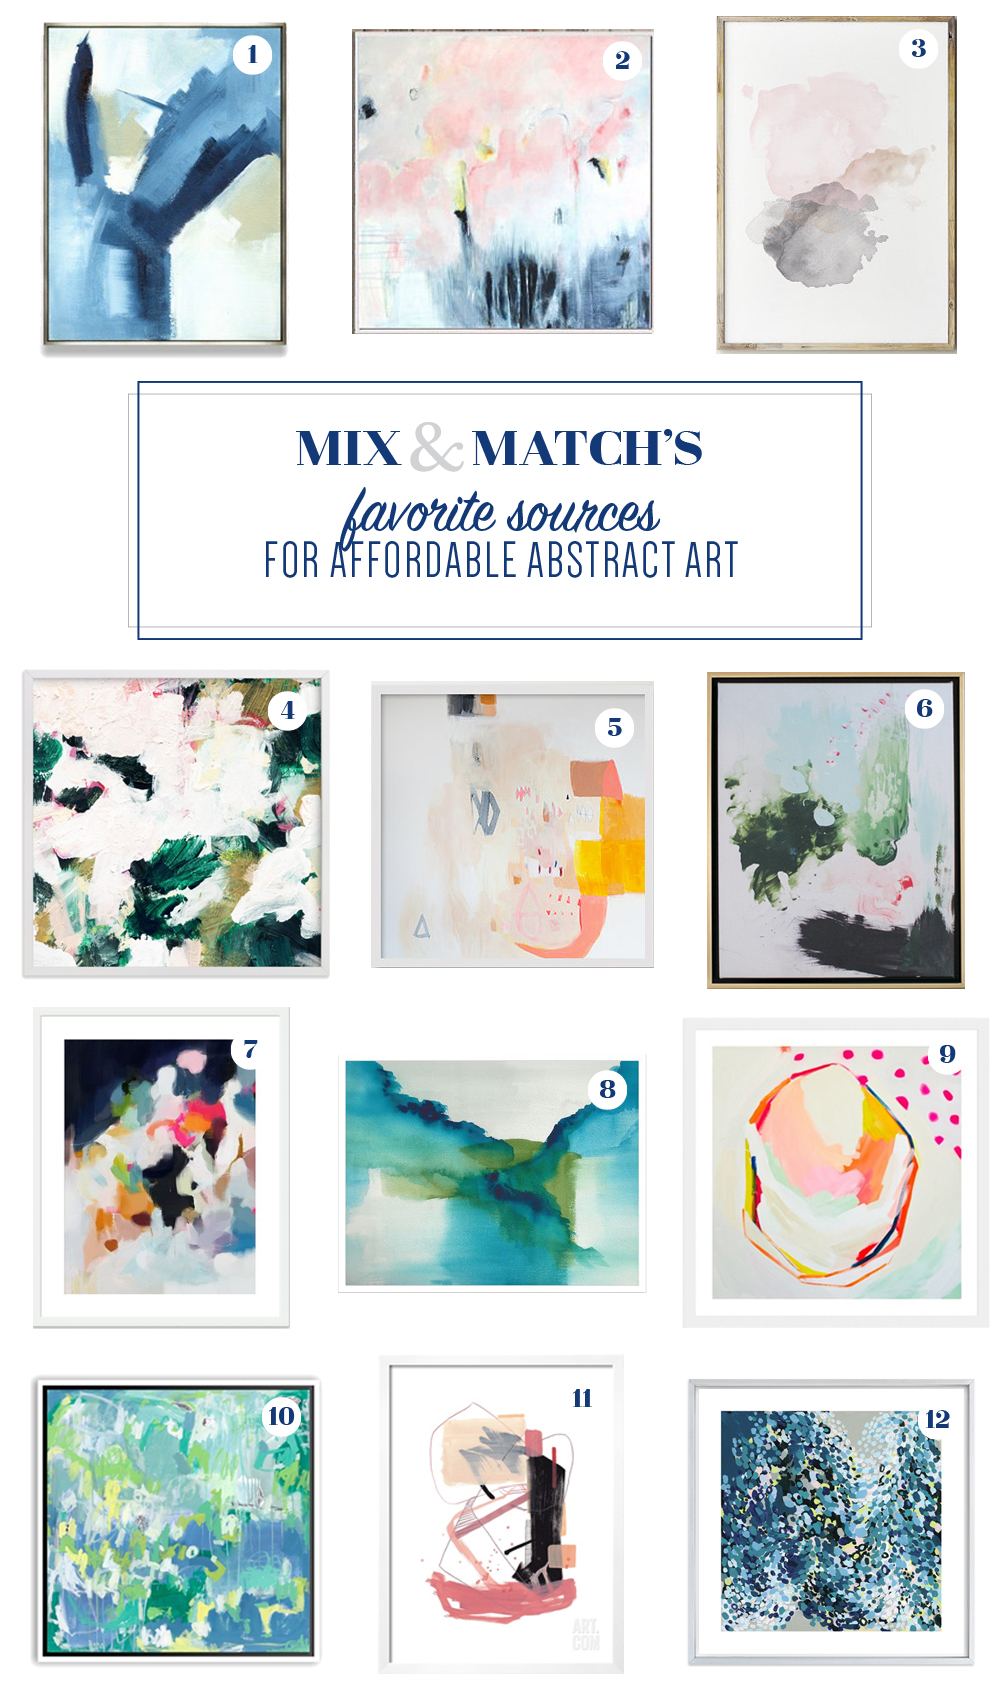 My Favorite Sources For Affordable Abstract Art